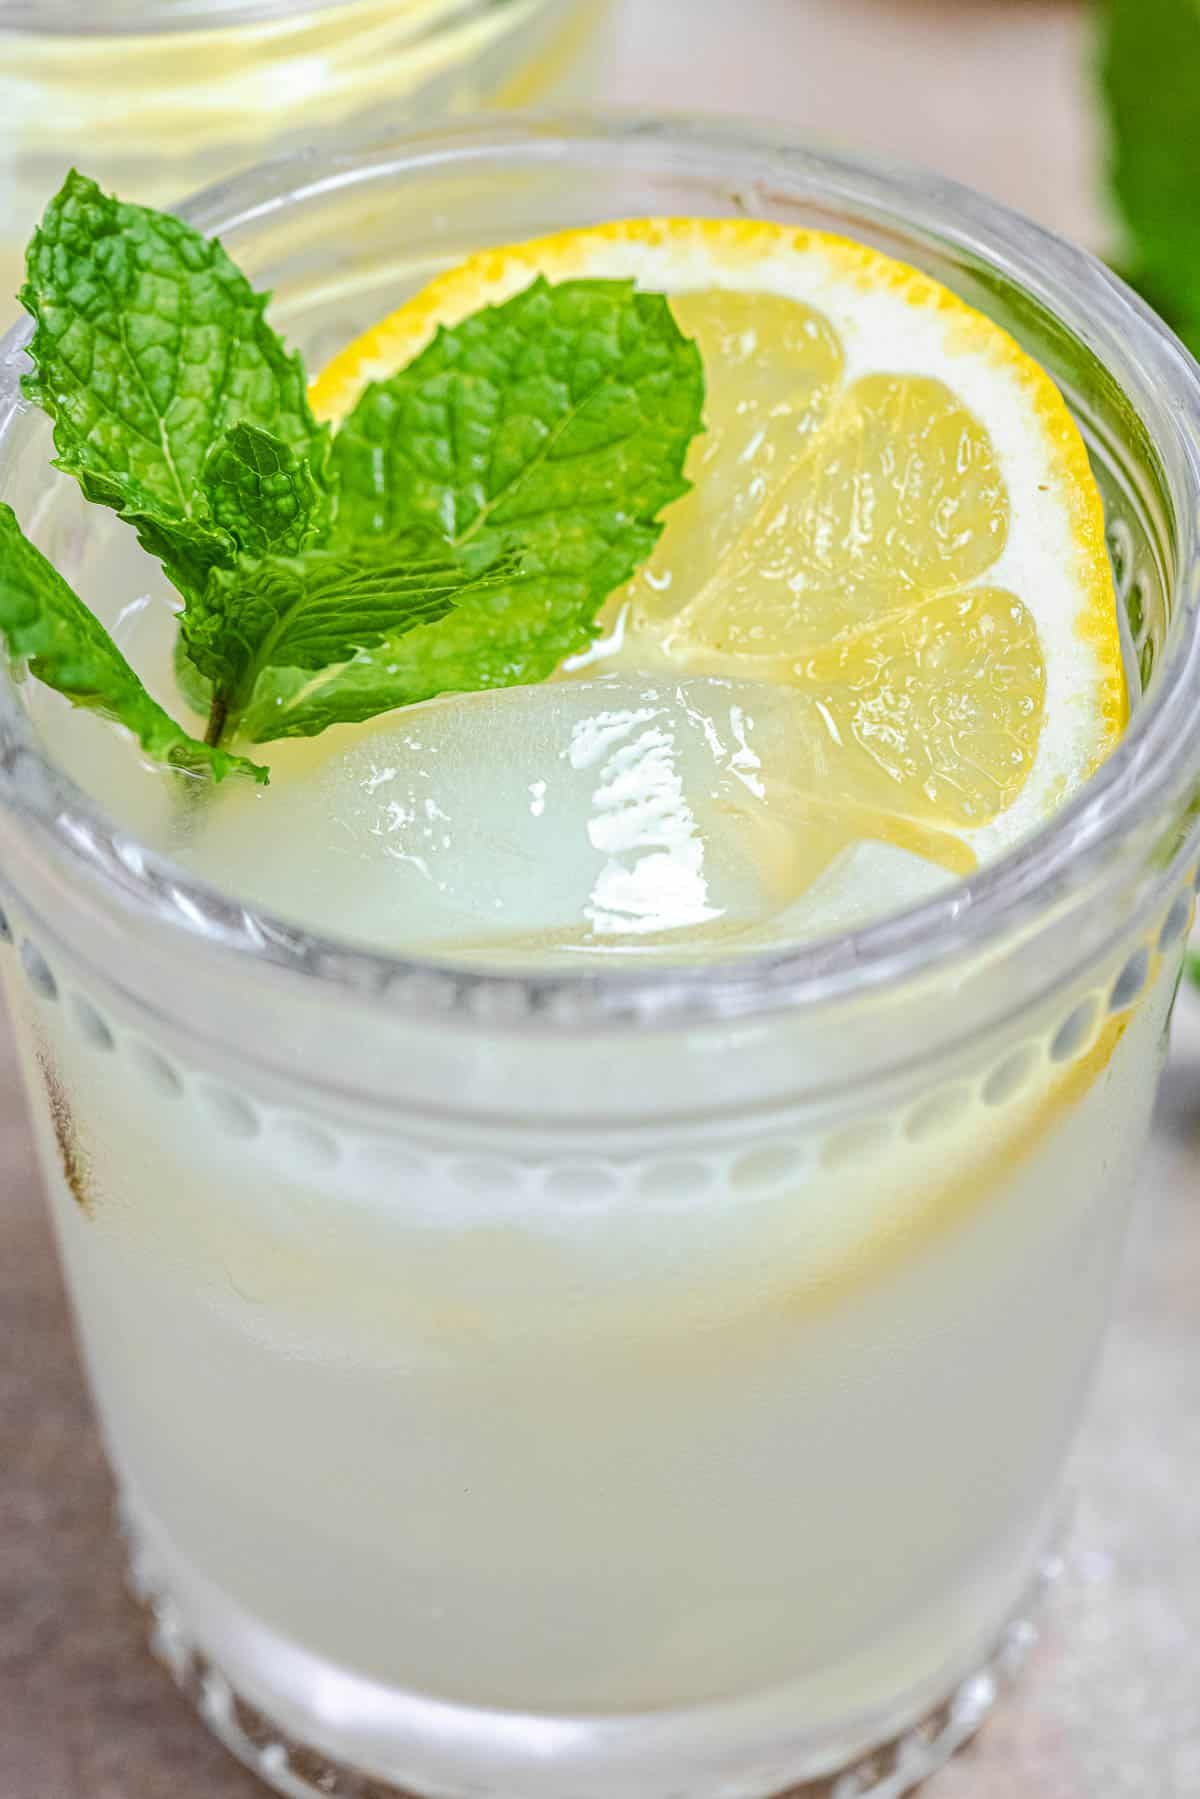 ouzo drink with fresh lemon, ice, and mint leaves.